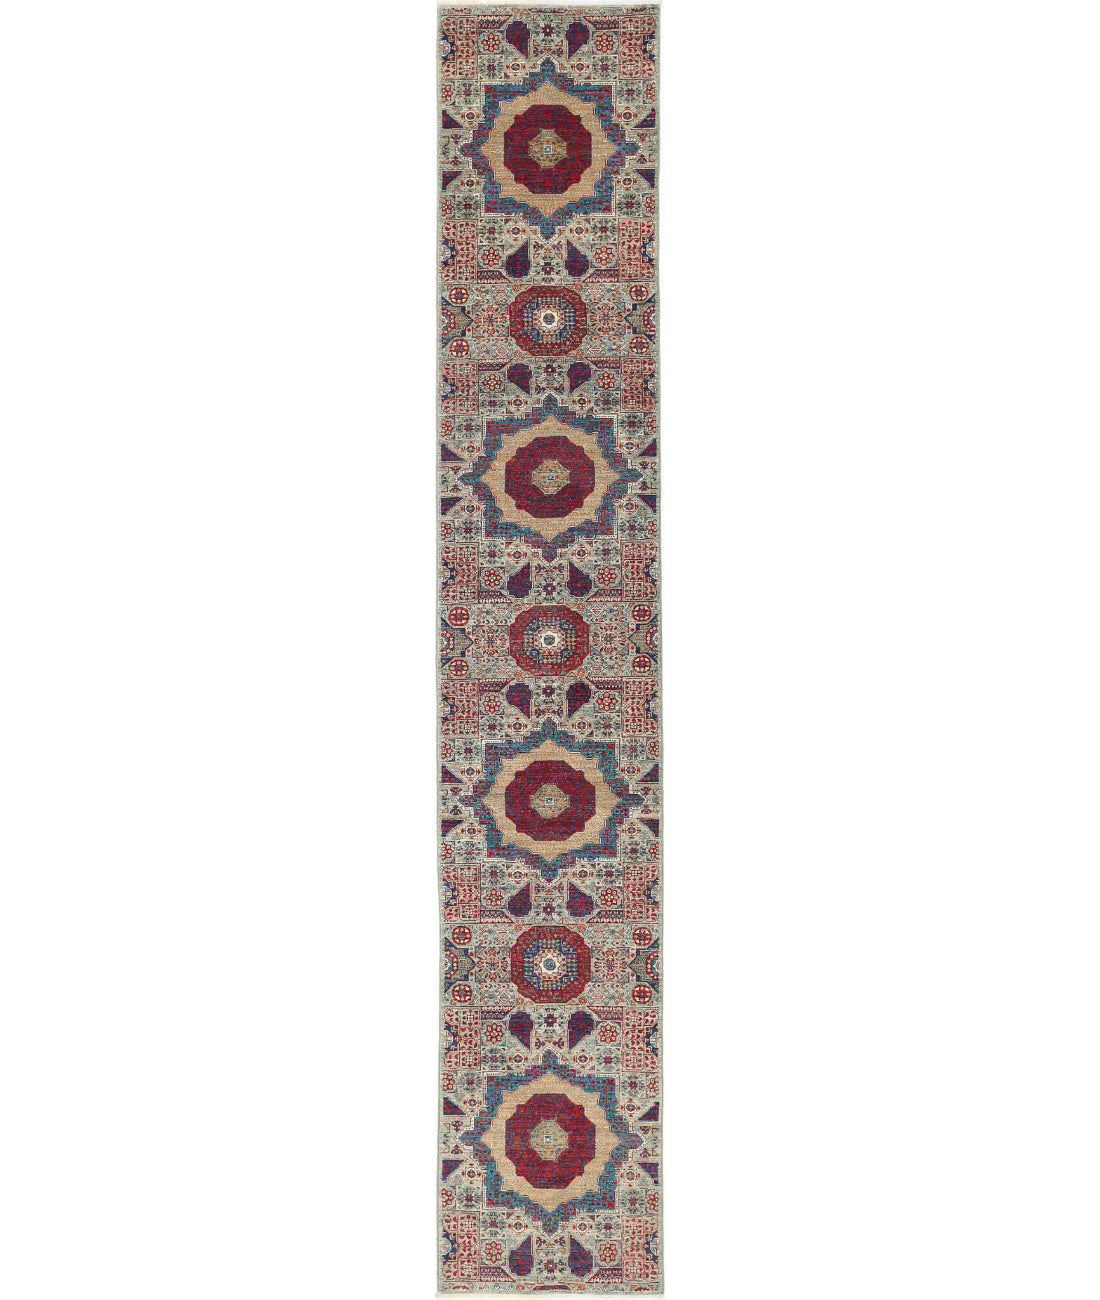 Hand Knotted Mamluk Wool Rug - 2&#39;5&#39;&#39; x 14&#39;6&#39;&#39; 2&#39;5&#39;&#39; x 14&#39;6&#39;&#39; (73 X 435) / Green / Red